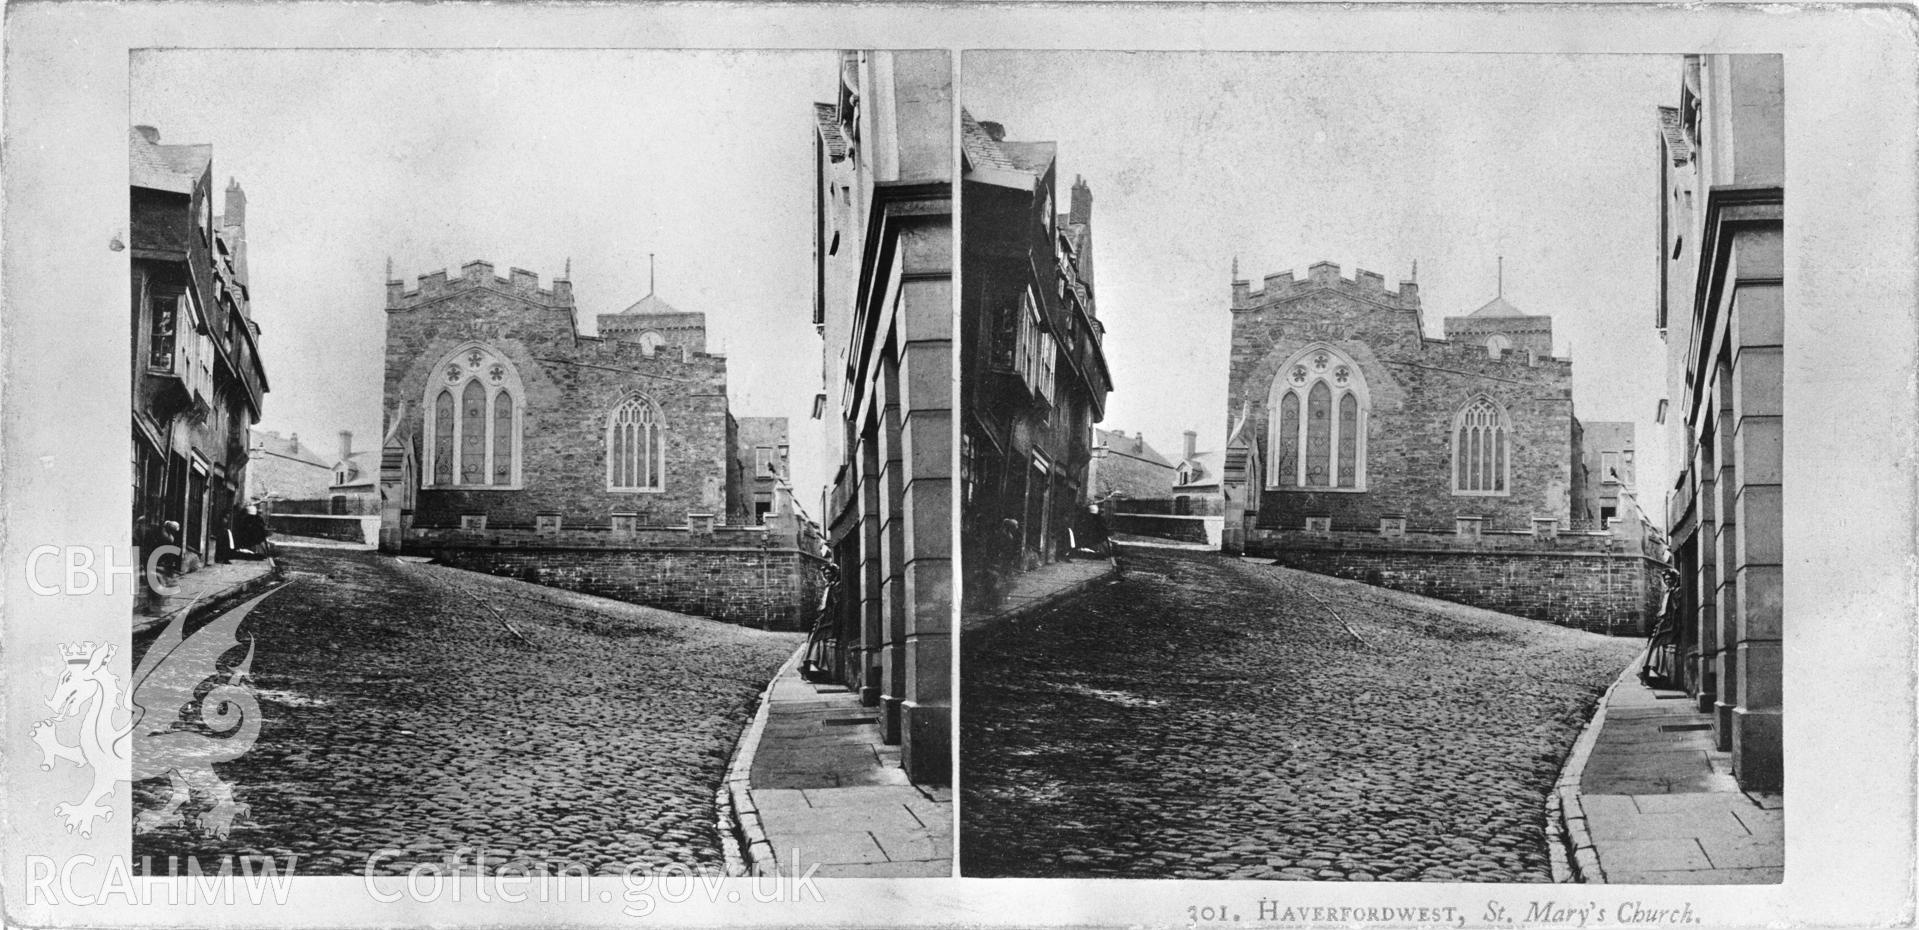 Stereoscopic view of St Mary's Church, Haverfordwest.